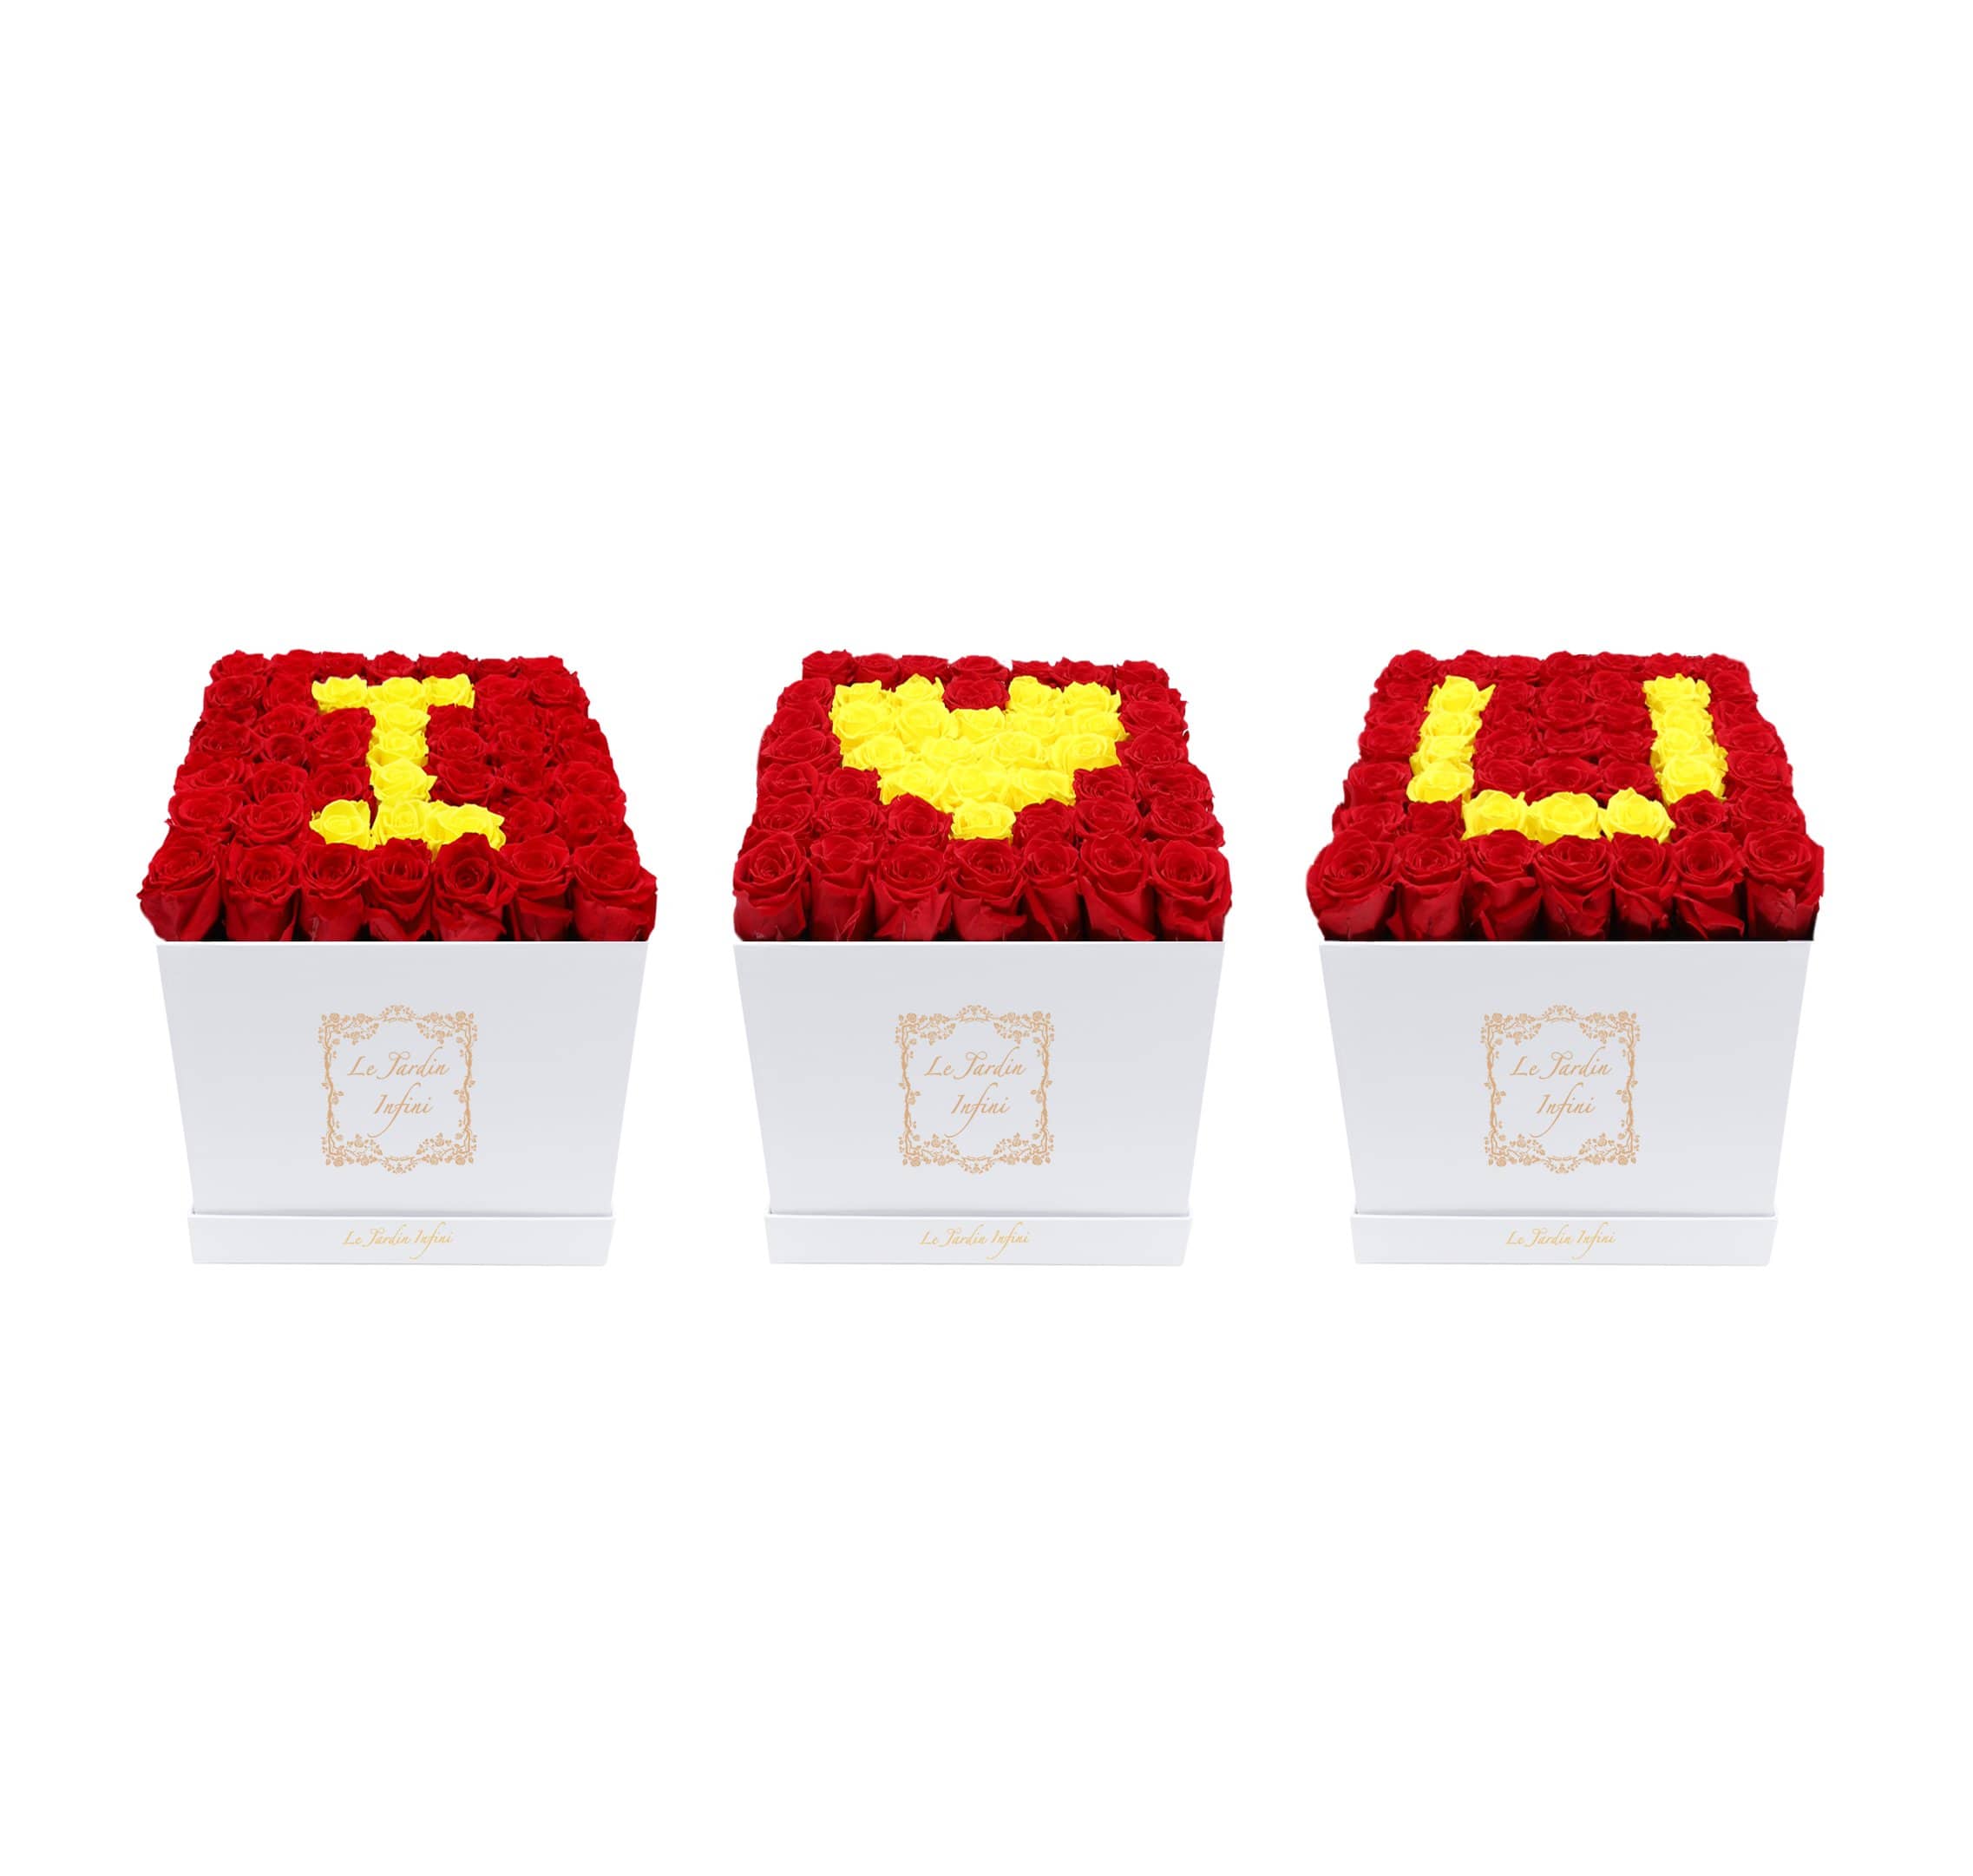 I Love U Set Yellow & Red Preserved Roses - Large Square Luxury White Box - Le Jardin Infini Roses in a Box